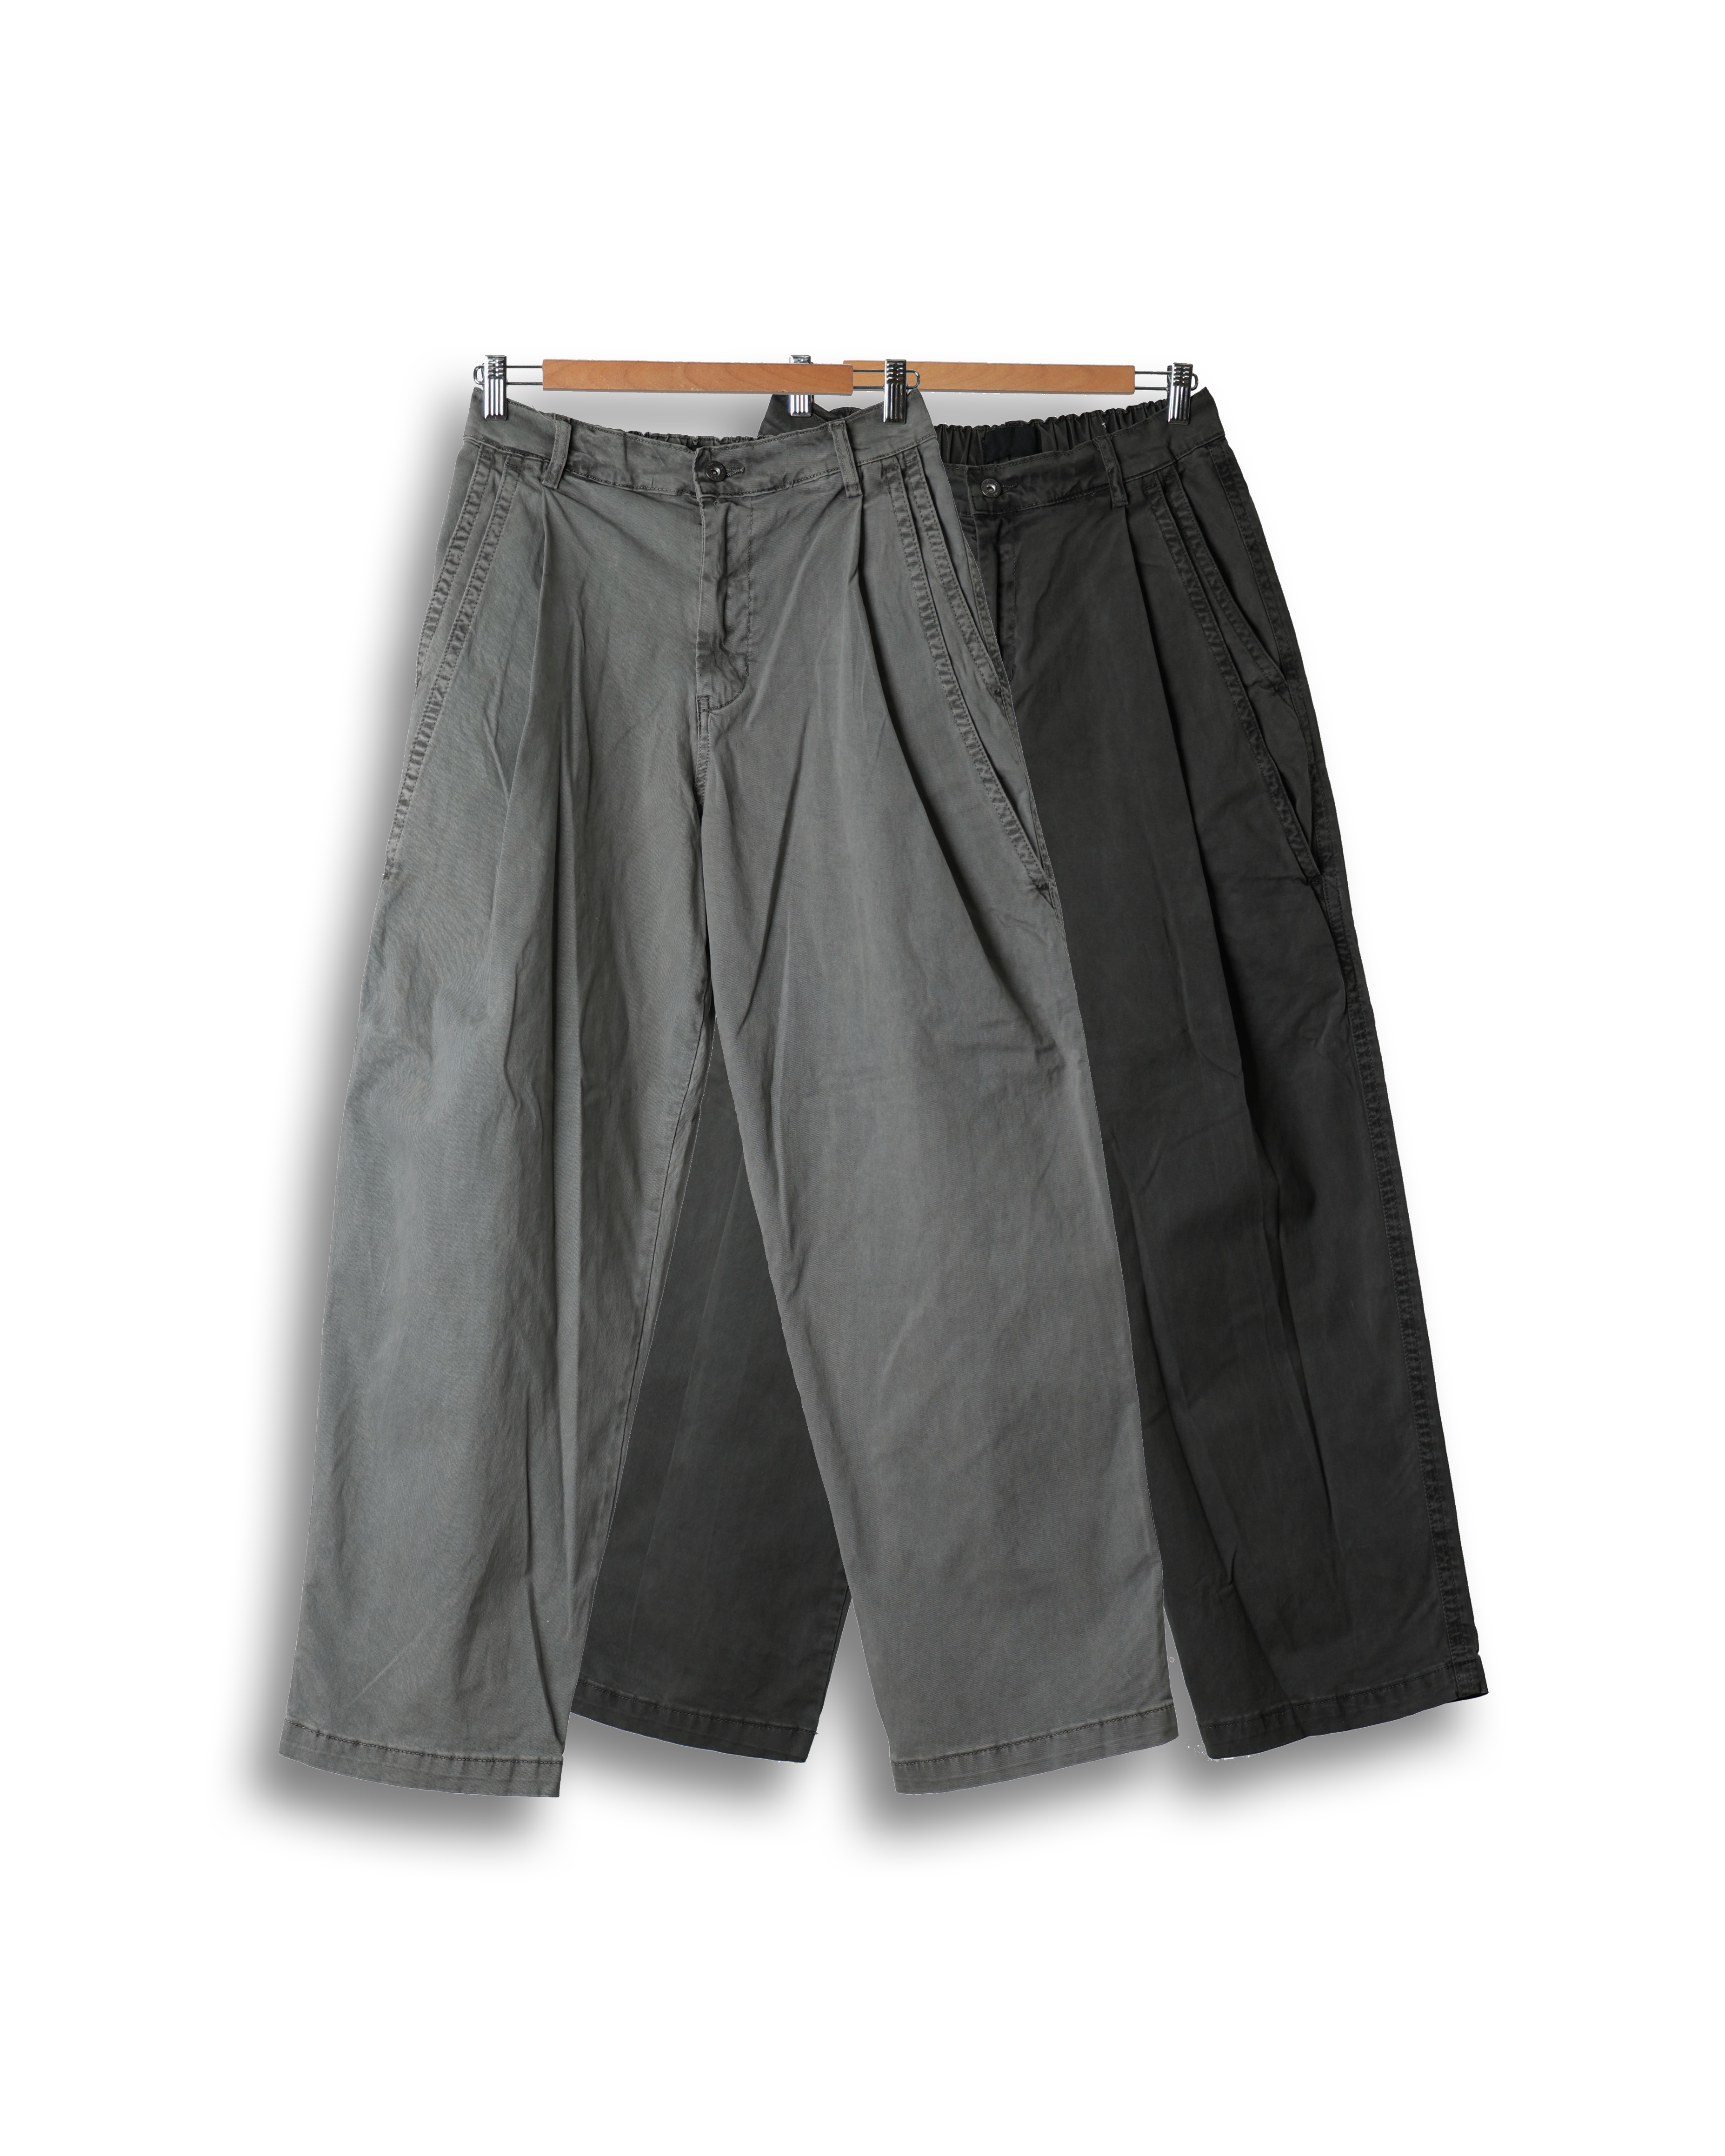 RPEN Double Pocket Pigment Wide Pants (Charcoal/Olive Gray)